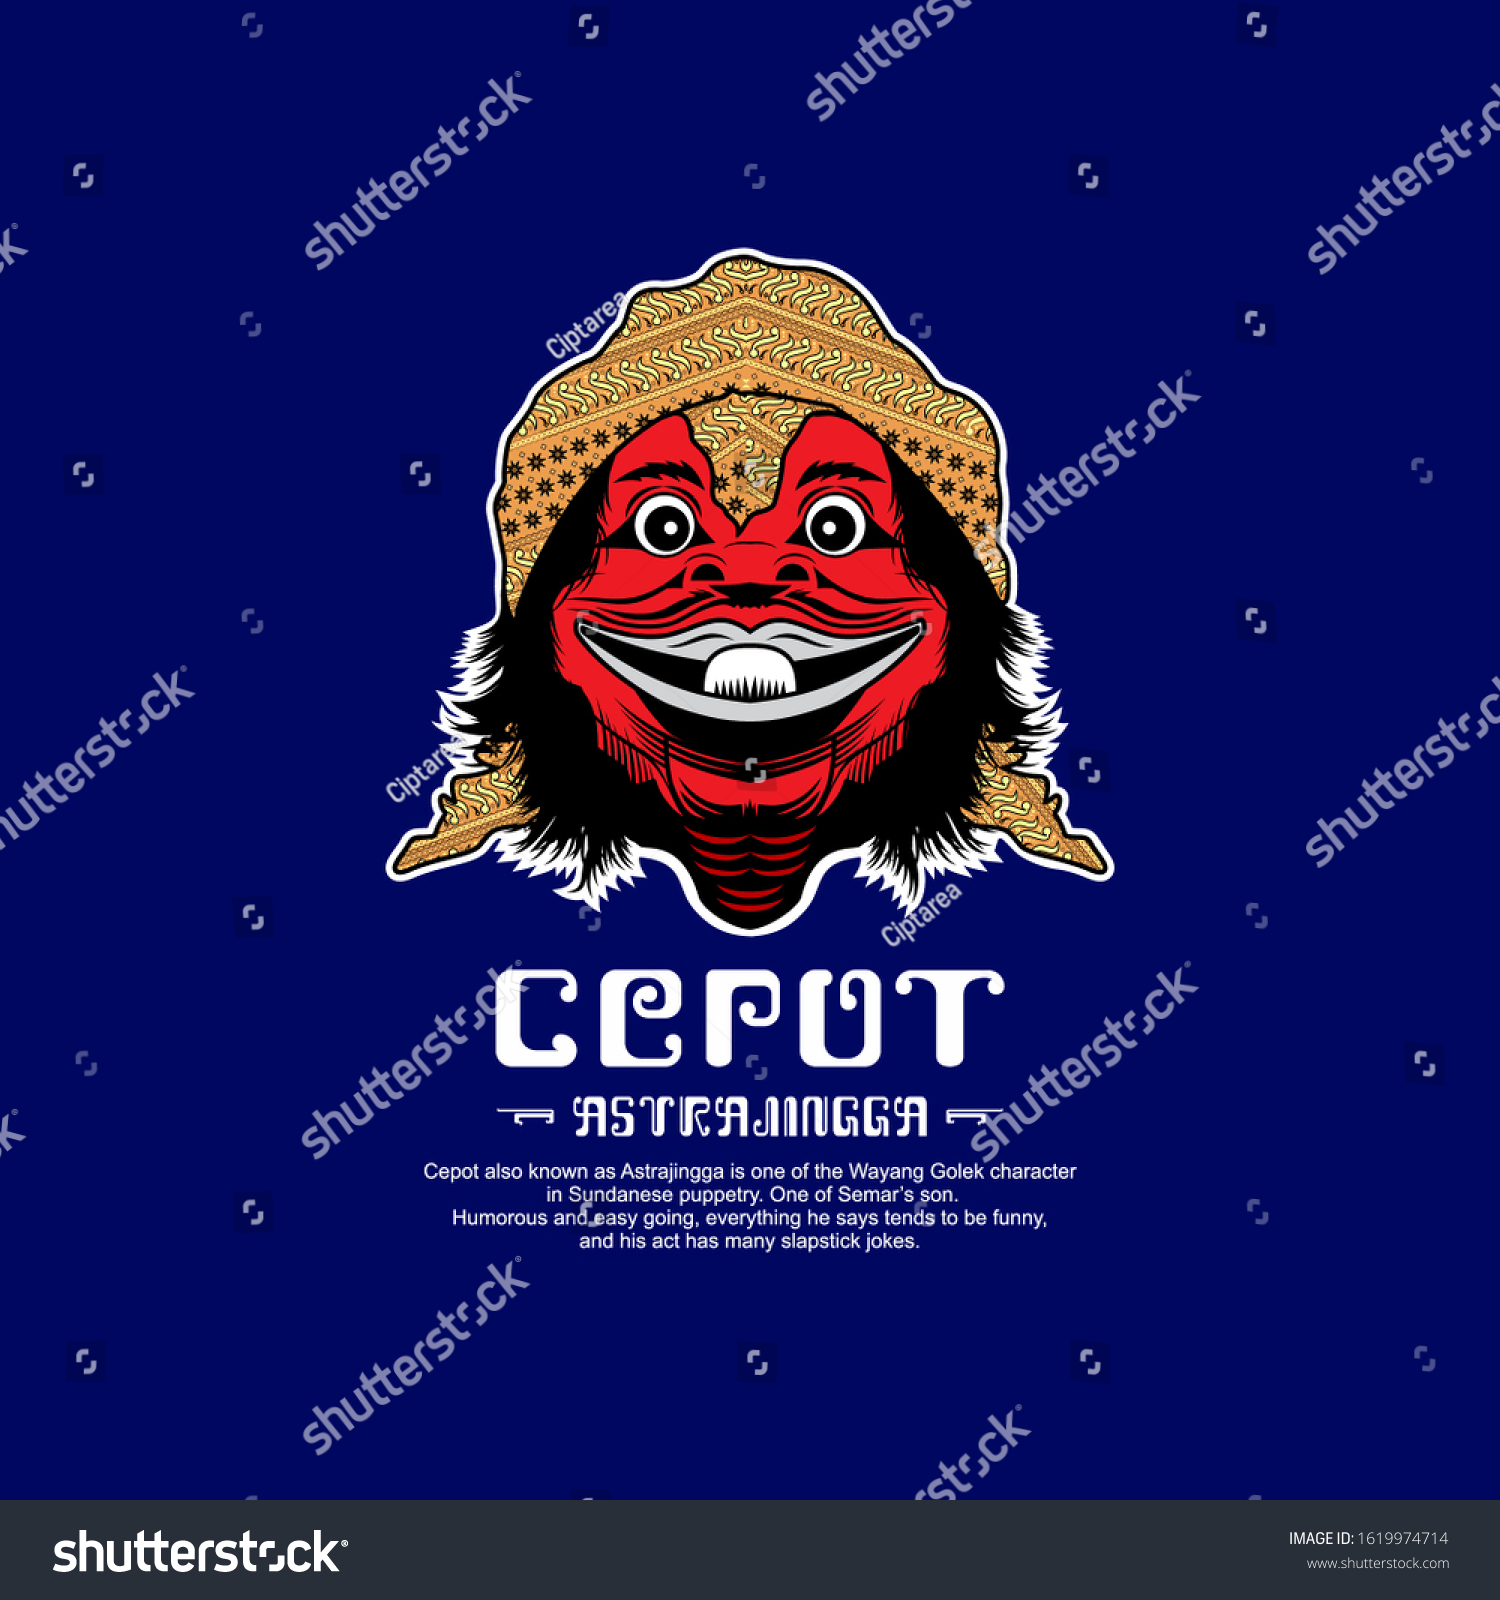 SVG of Cepot in Vector style, traditional puppet figure in Sundanese culture West Java Indonesia. One of Semar's son, his character is humorous and easy going. svg